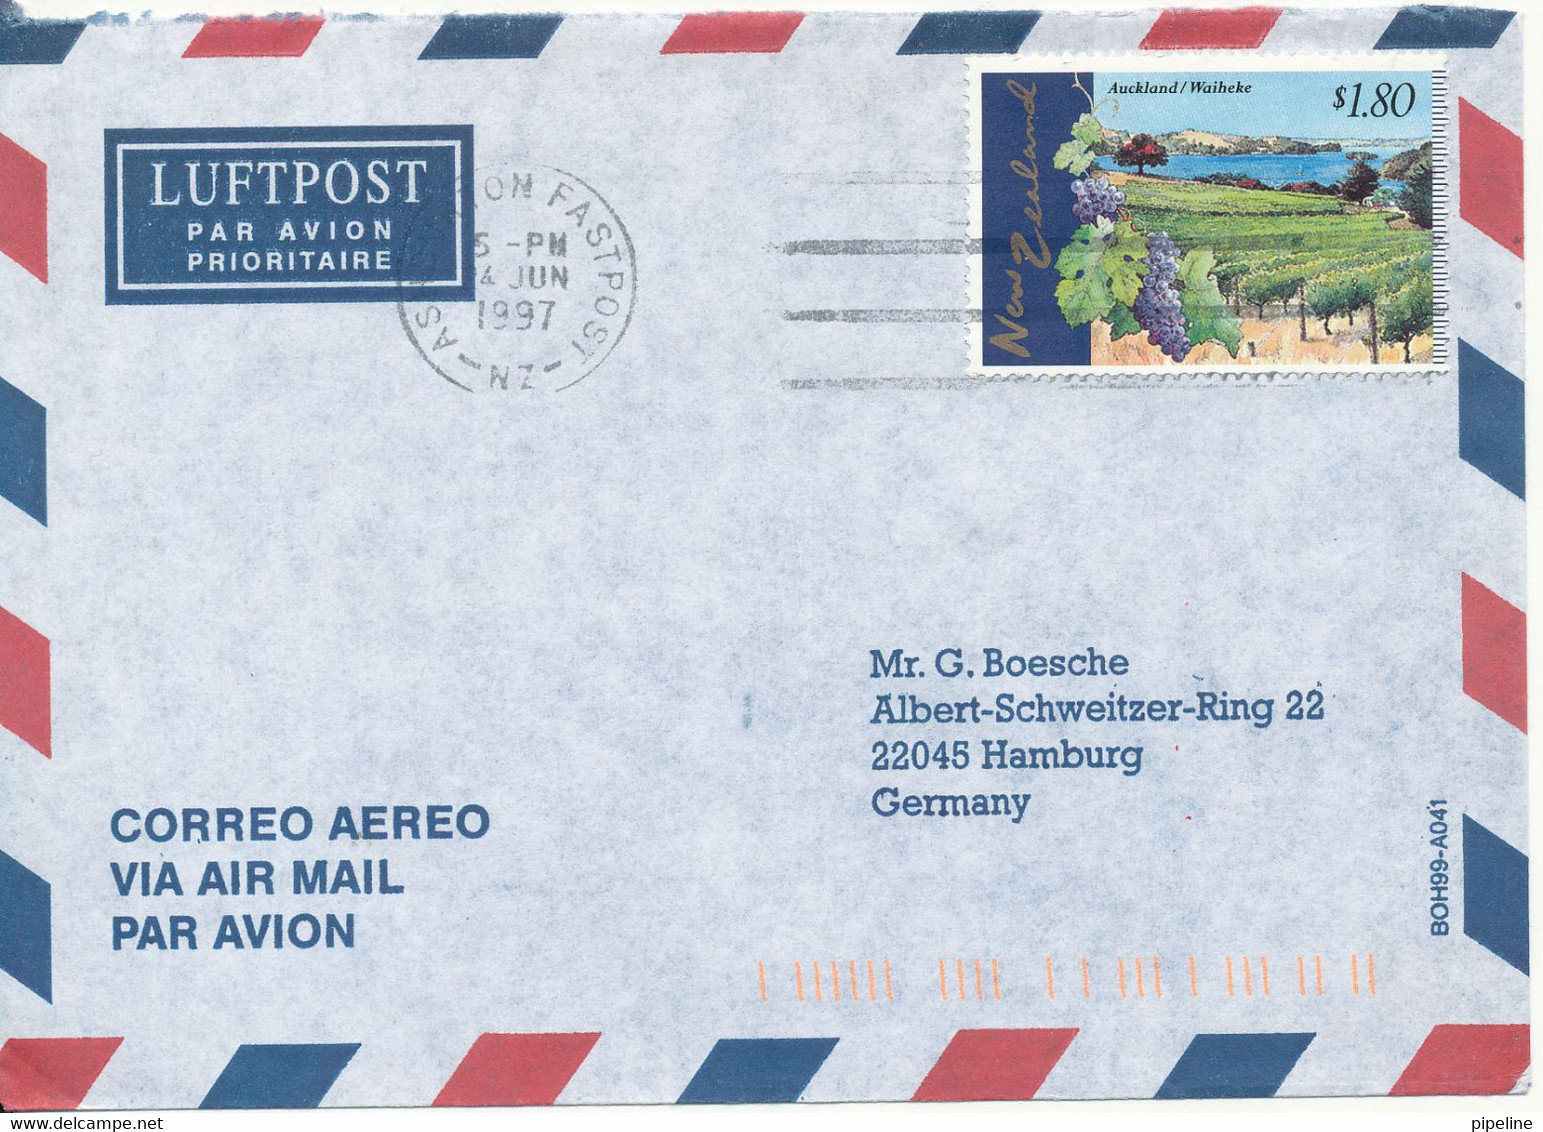 New Zealand Air Mail Cover Sent To Germany 24-6-1997 Single Franked - Airmail